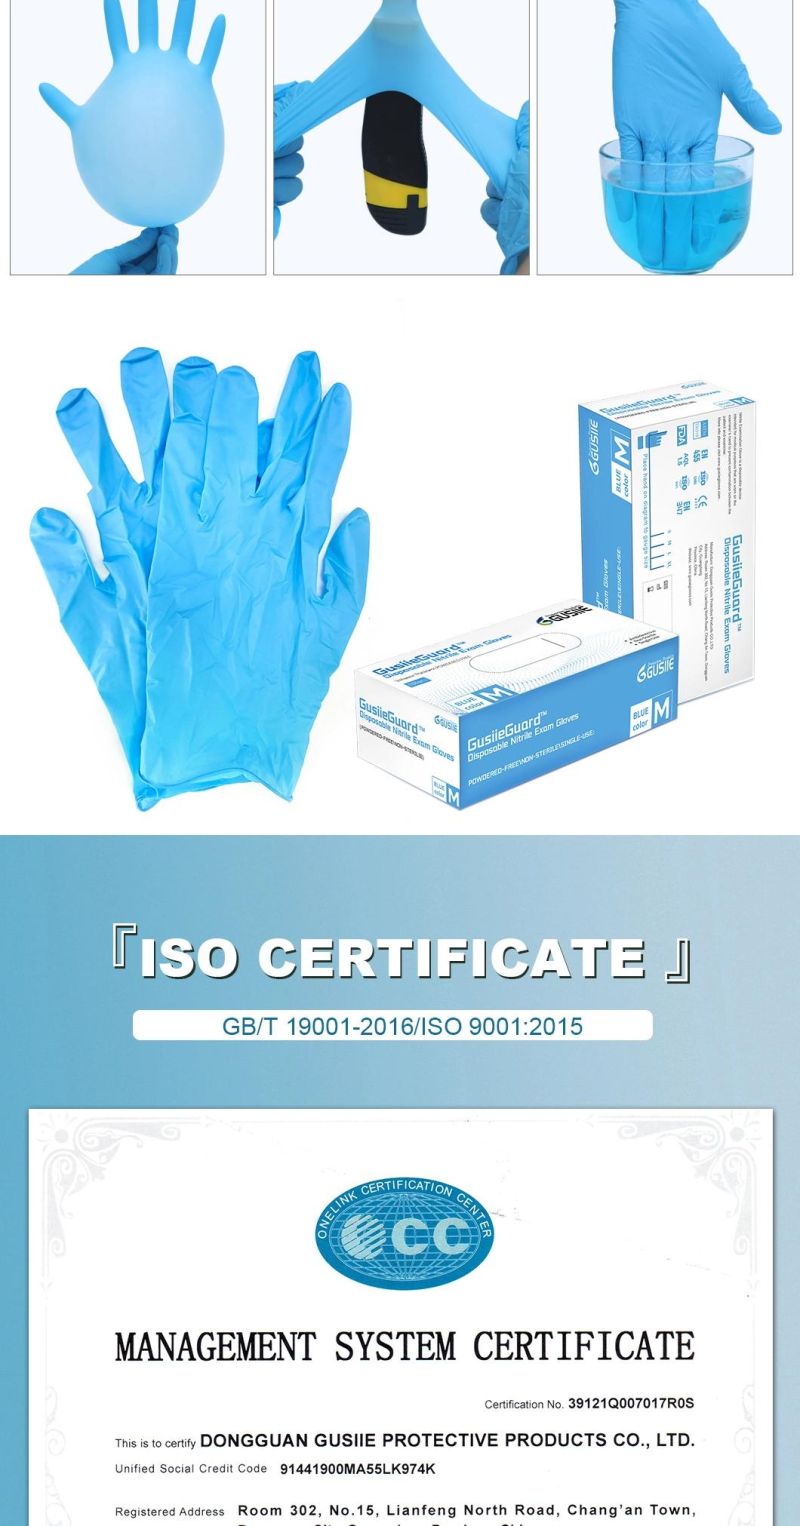 Gusiie 100 a Box of High-Quality Nitrile Medical Examination Gloves